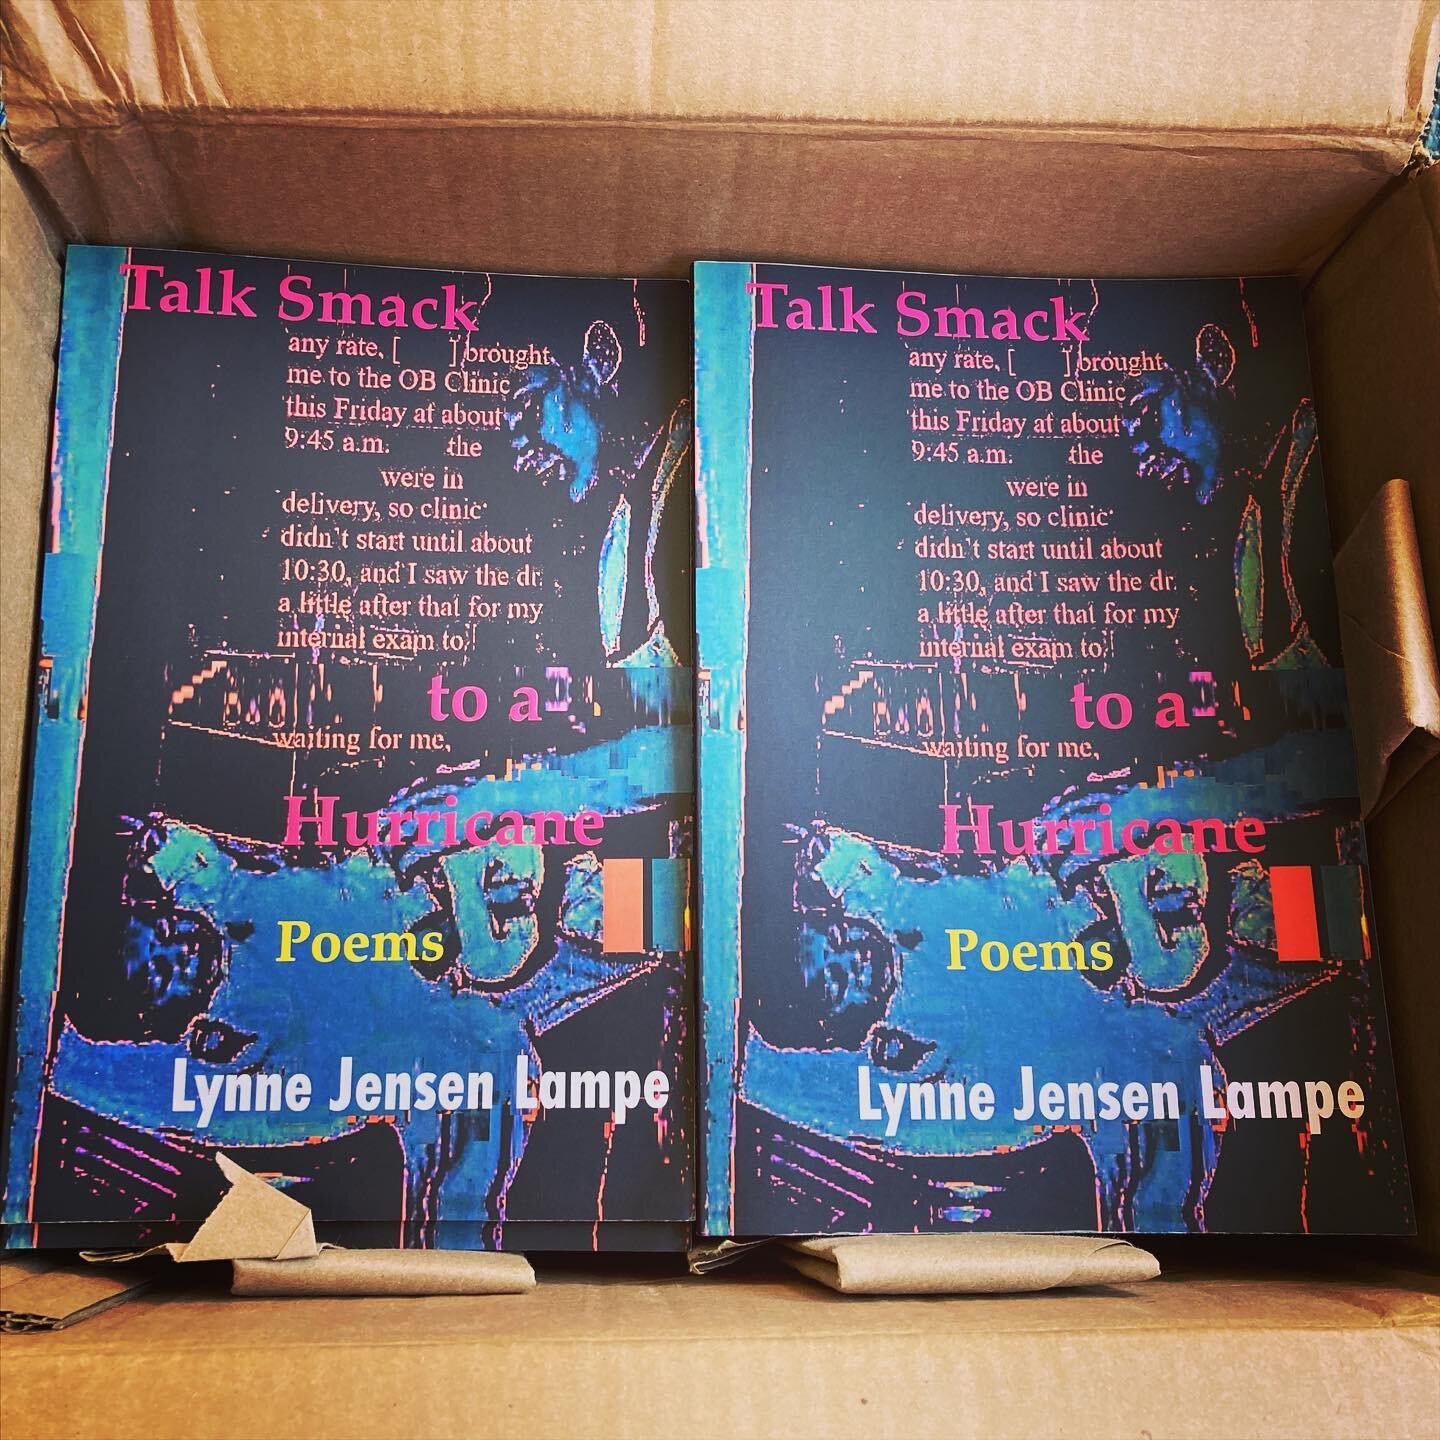 Today&rsquo;s the day! Preorders start for my debut poetry collection Talk Smack to a Hurricane (Ice Floe Press) https://IceFloe press.net/talk-smack-to-a-hurricane-lynne-jensen-lampe/